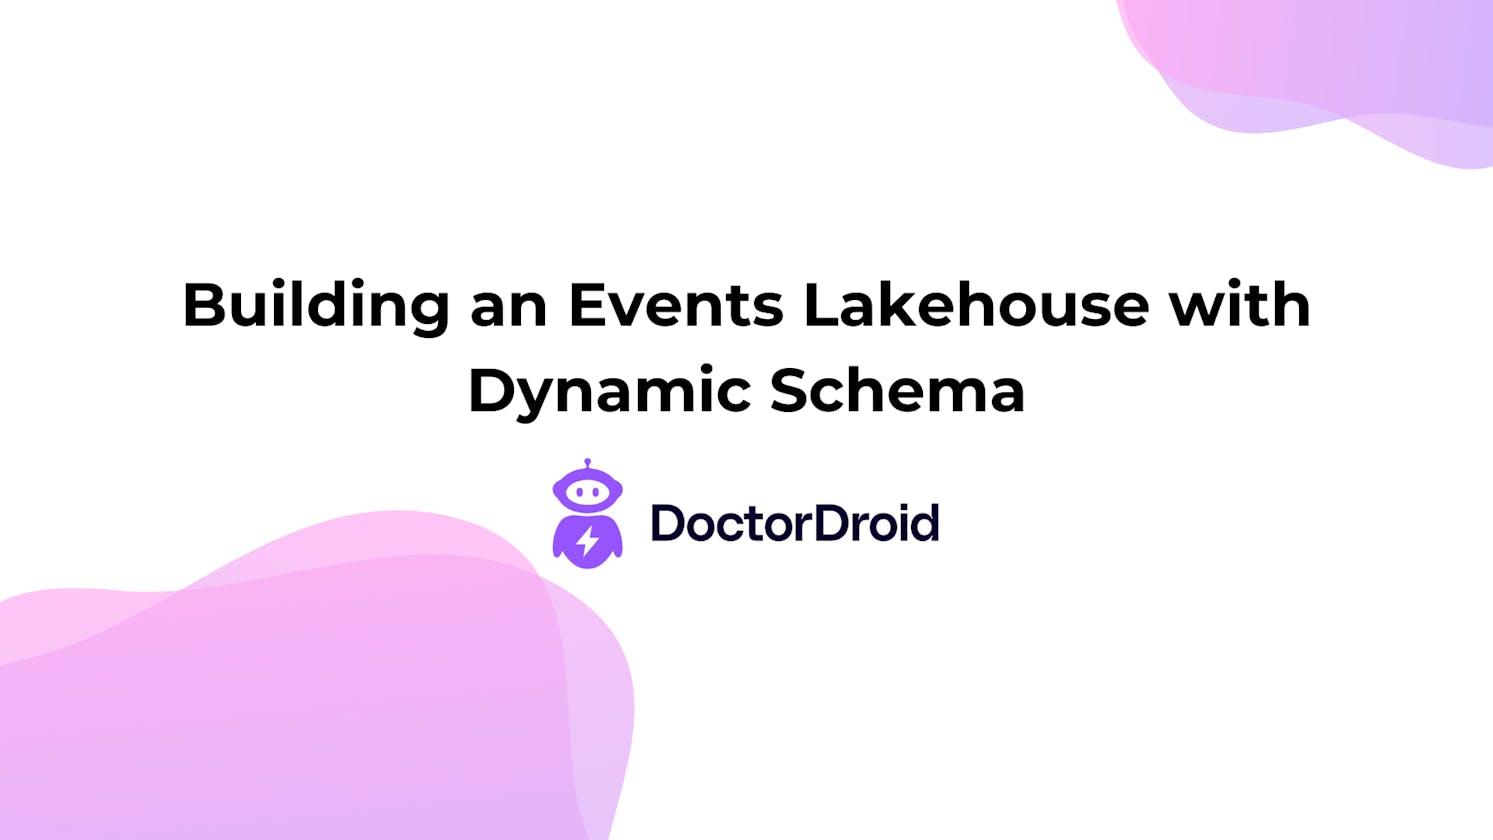 Building an Events Lakehouse with Dynamic Schema